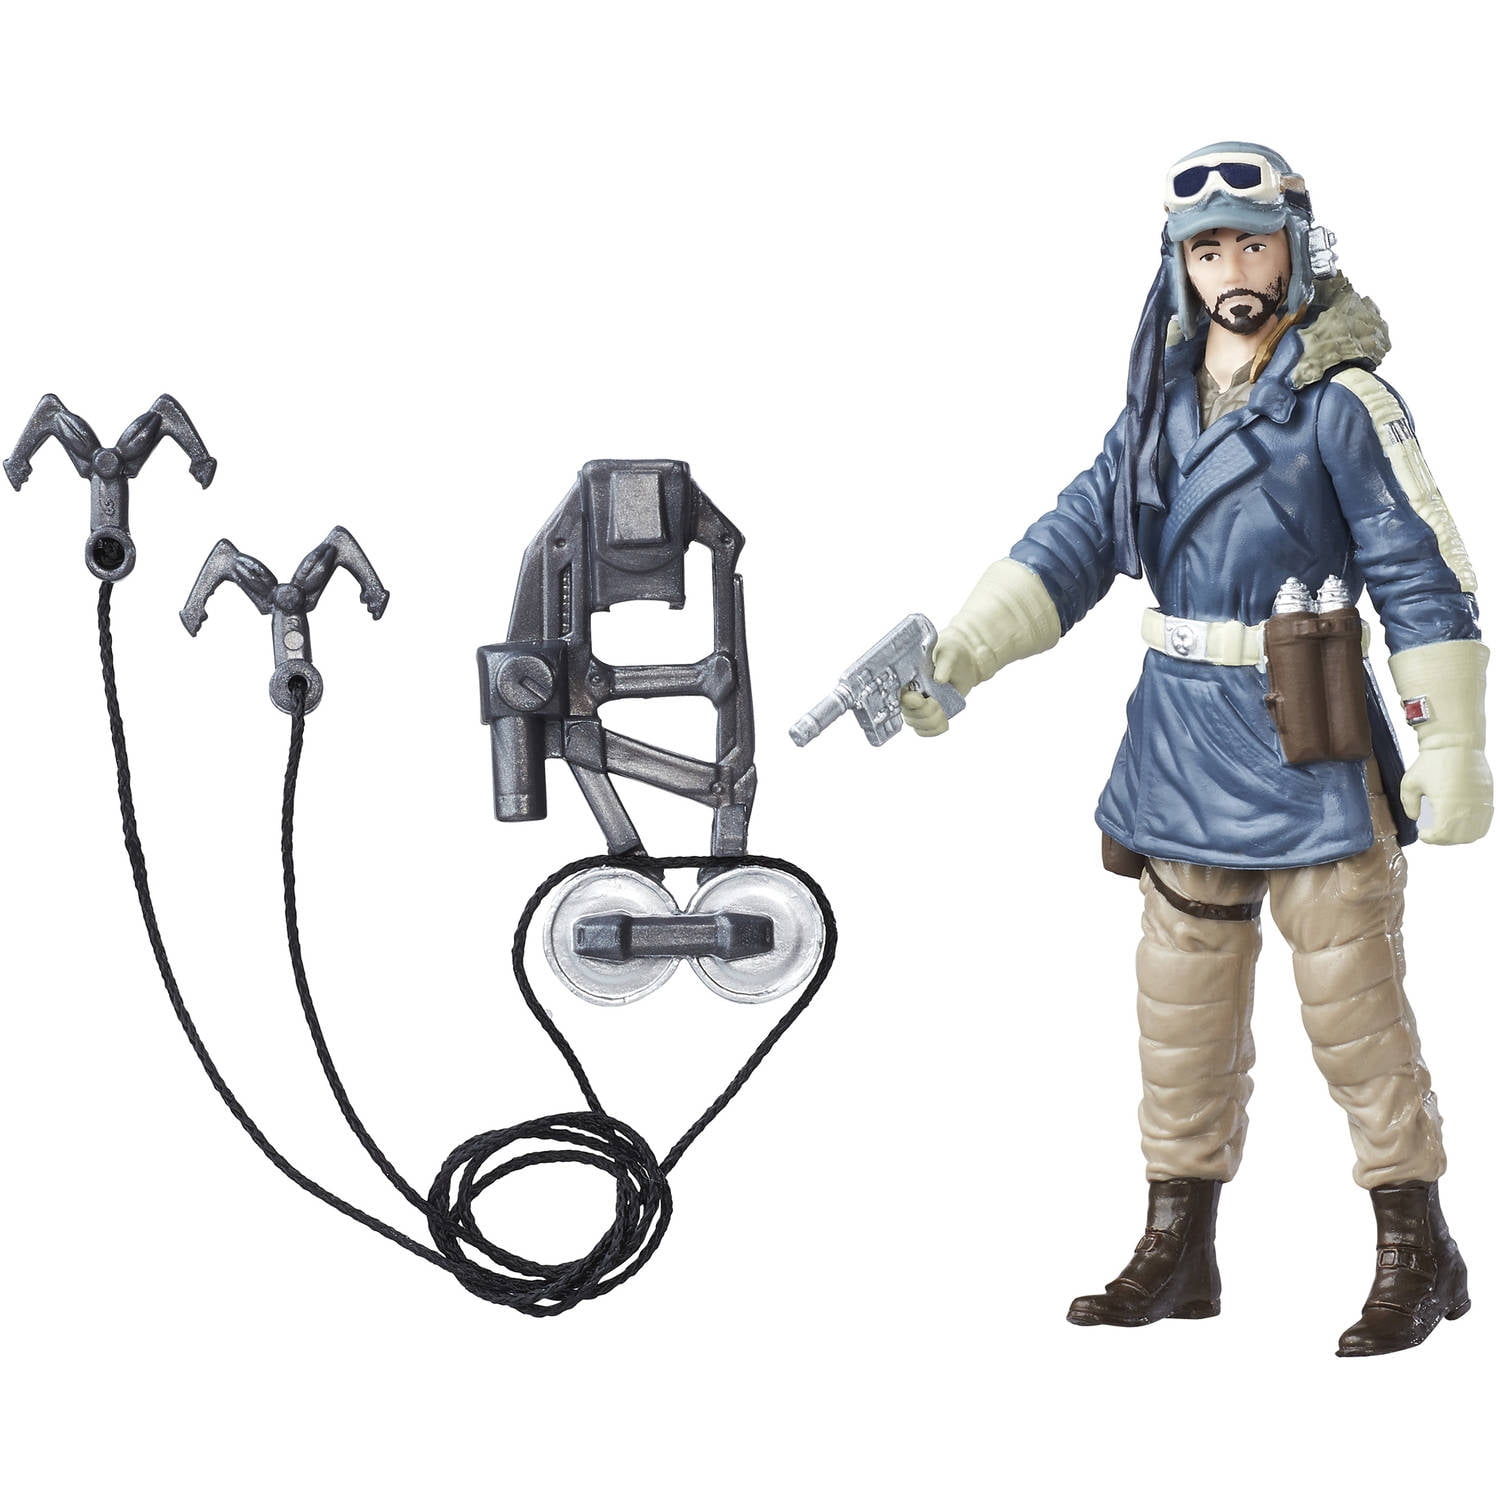 Star Wars Rogue One Captain Cassian Andor Action Figure Hasbro 2016 for sale online 